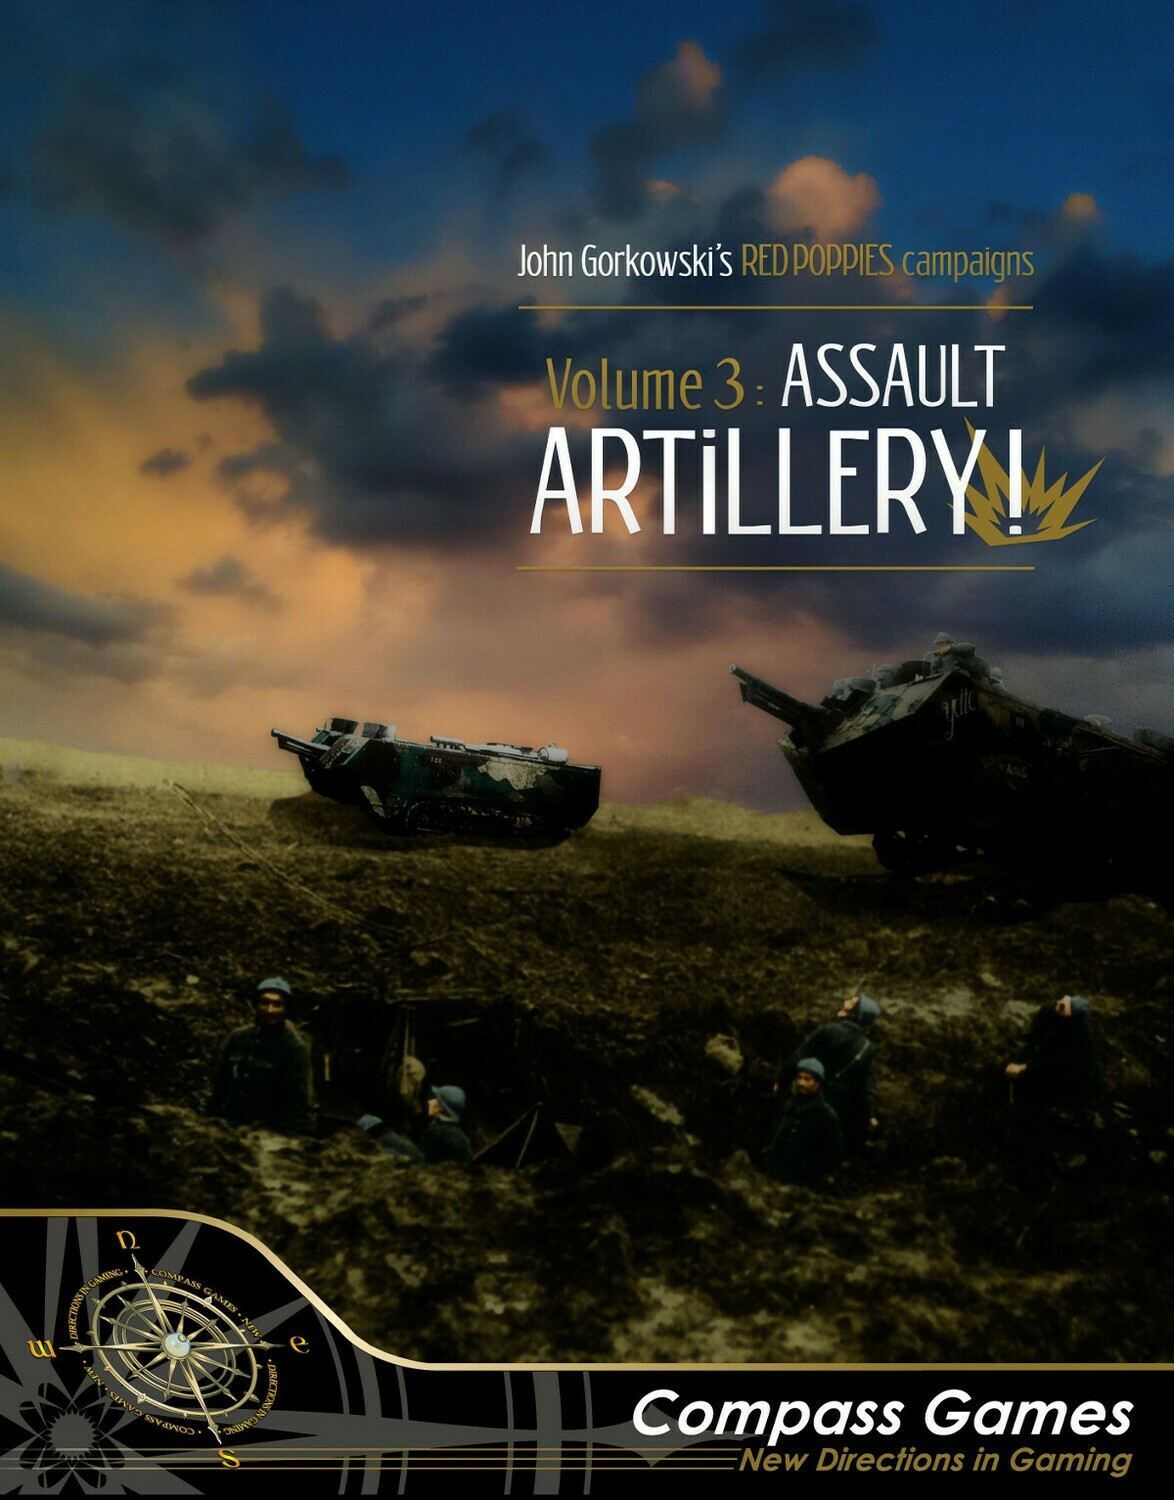 Red Poppies Campaigns: Volume 3 - Assault Artillery!